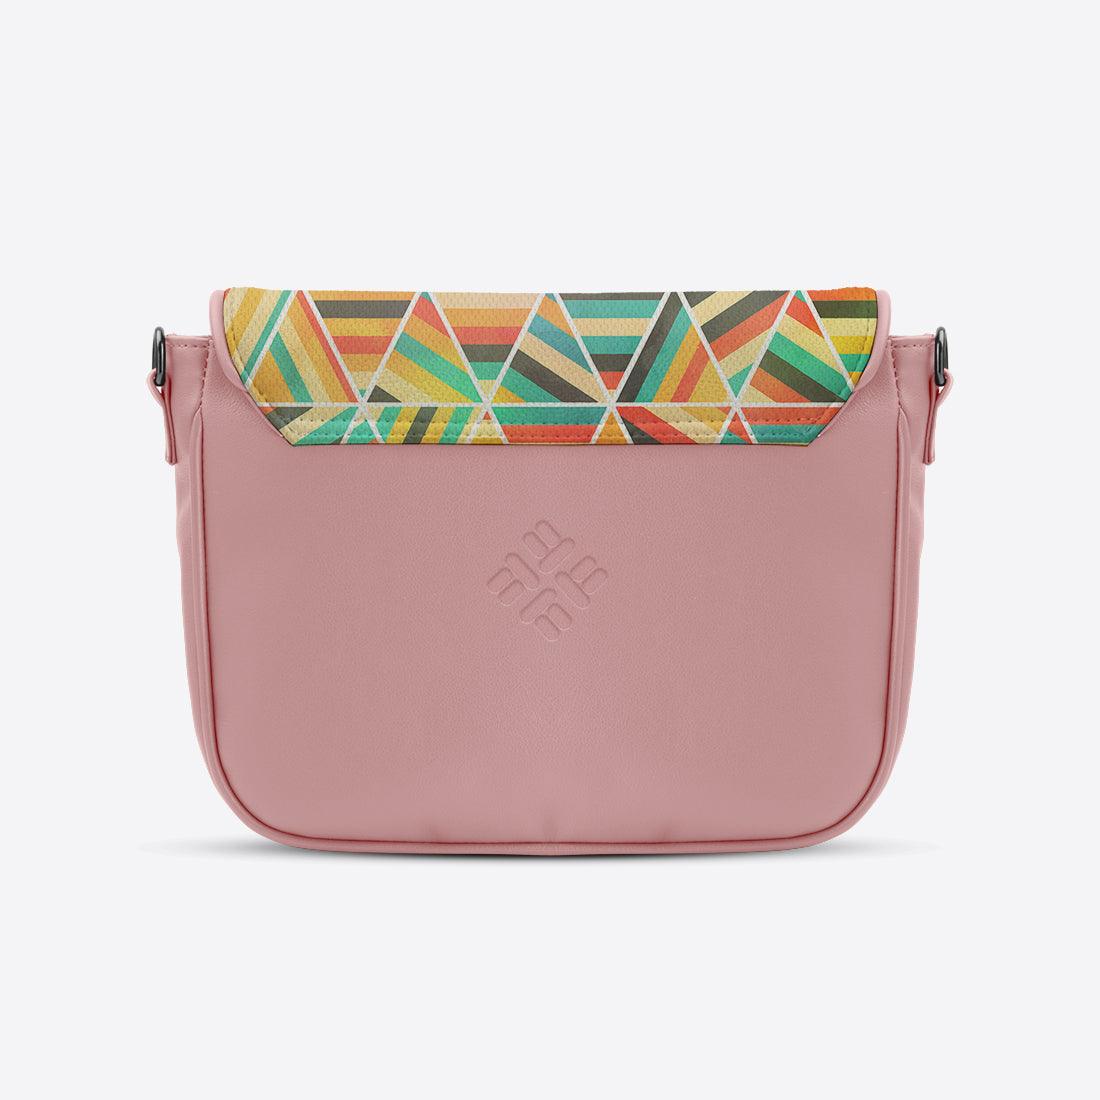 Rose Messenger Crossbody Colorful Triangles - CANVAEGYPT